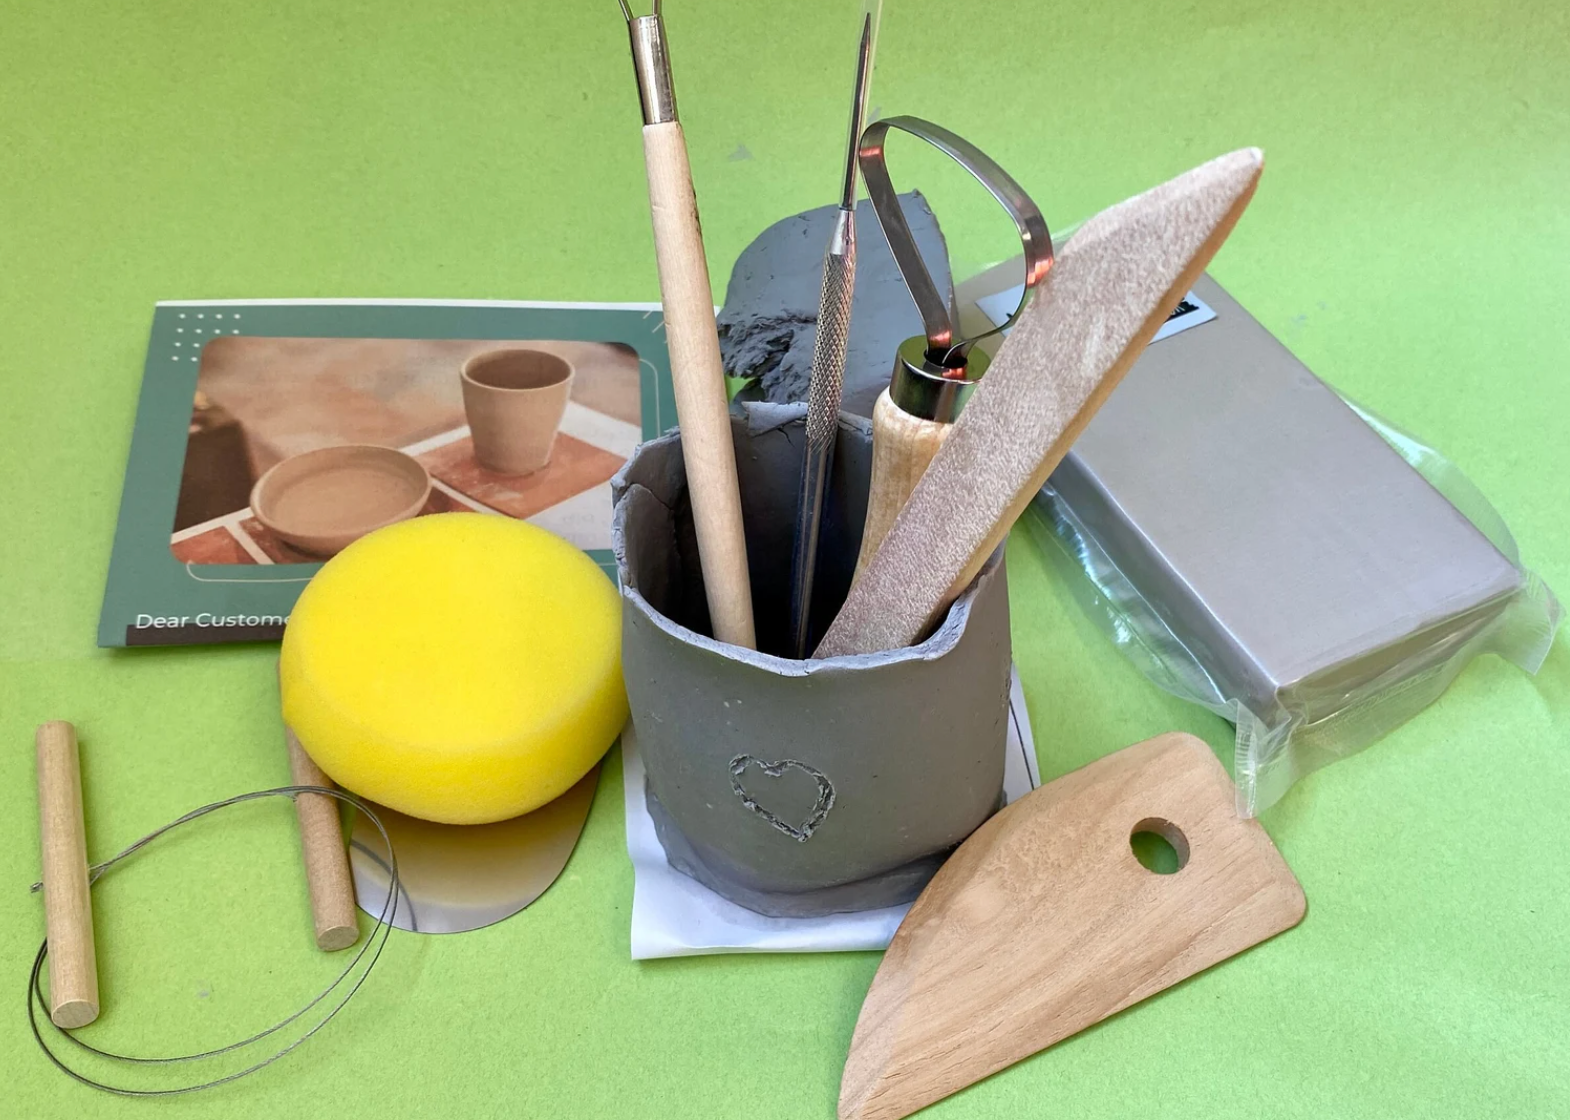 clay pottery kit for adults craft